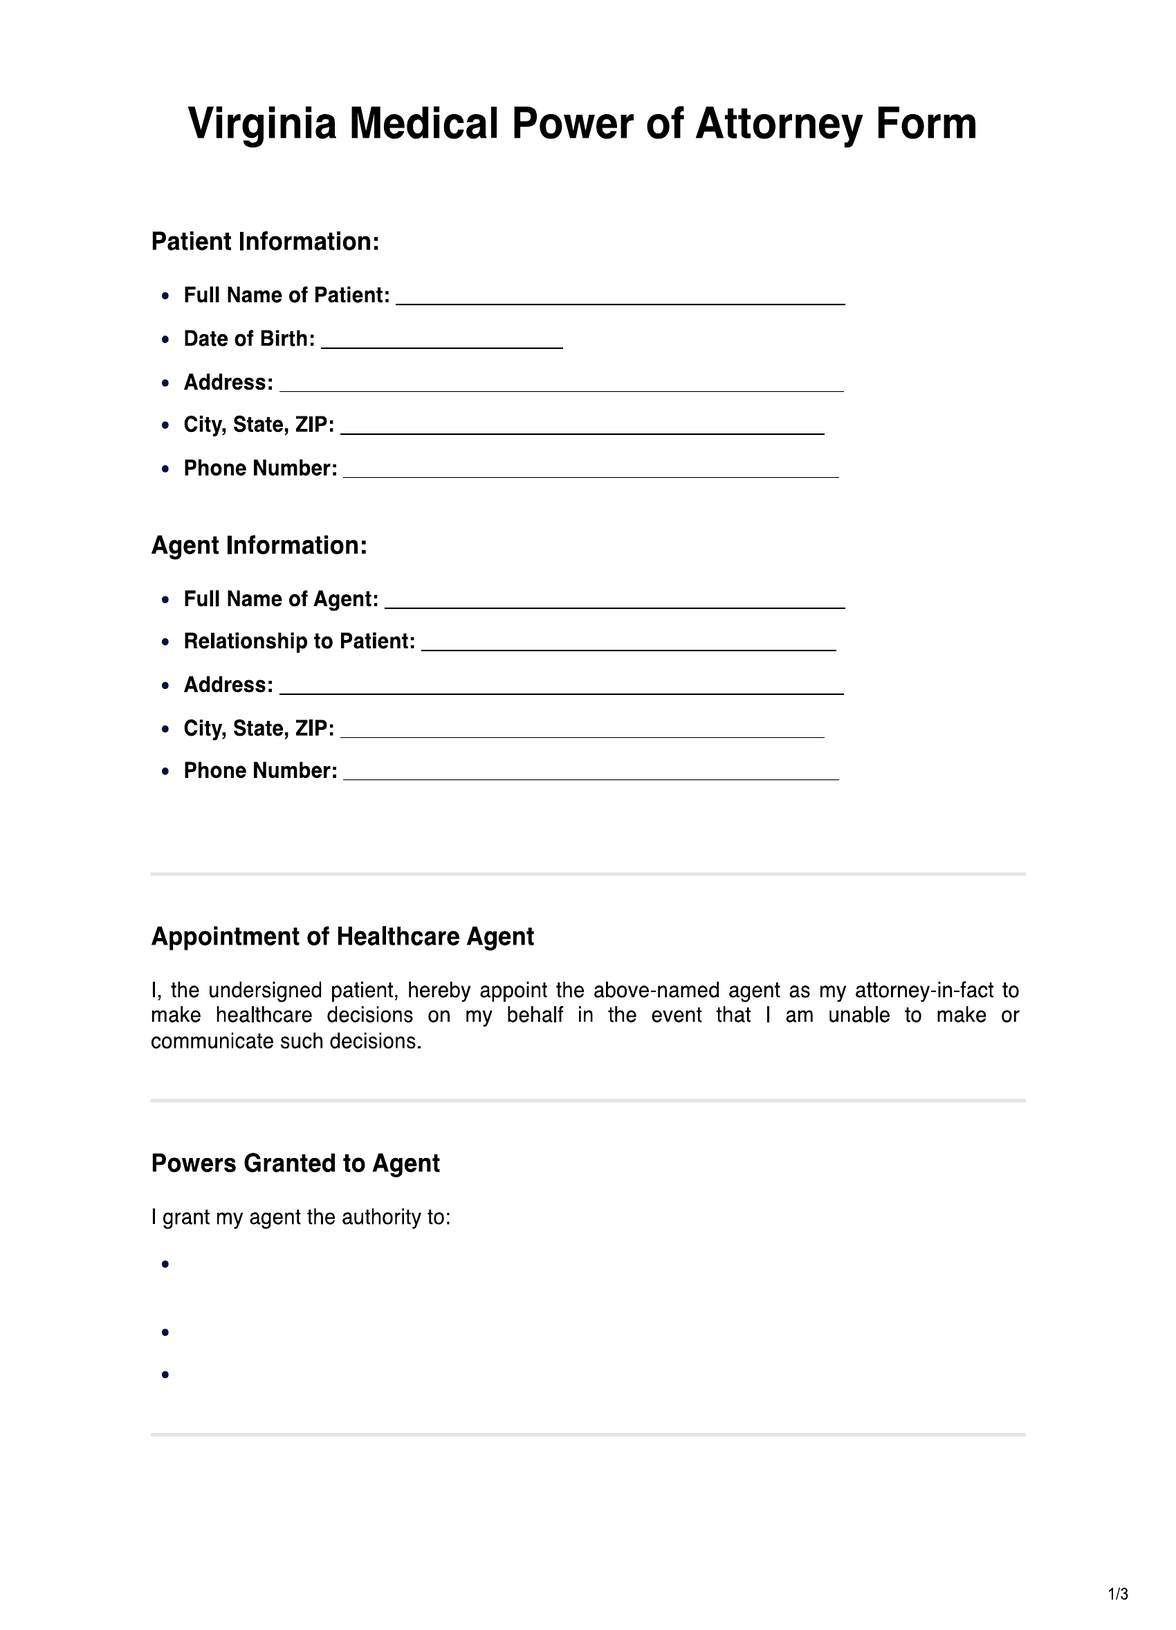 Virginia Medical Power of Attorney Form PDF Example